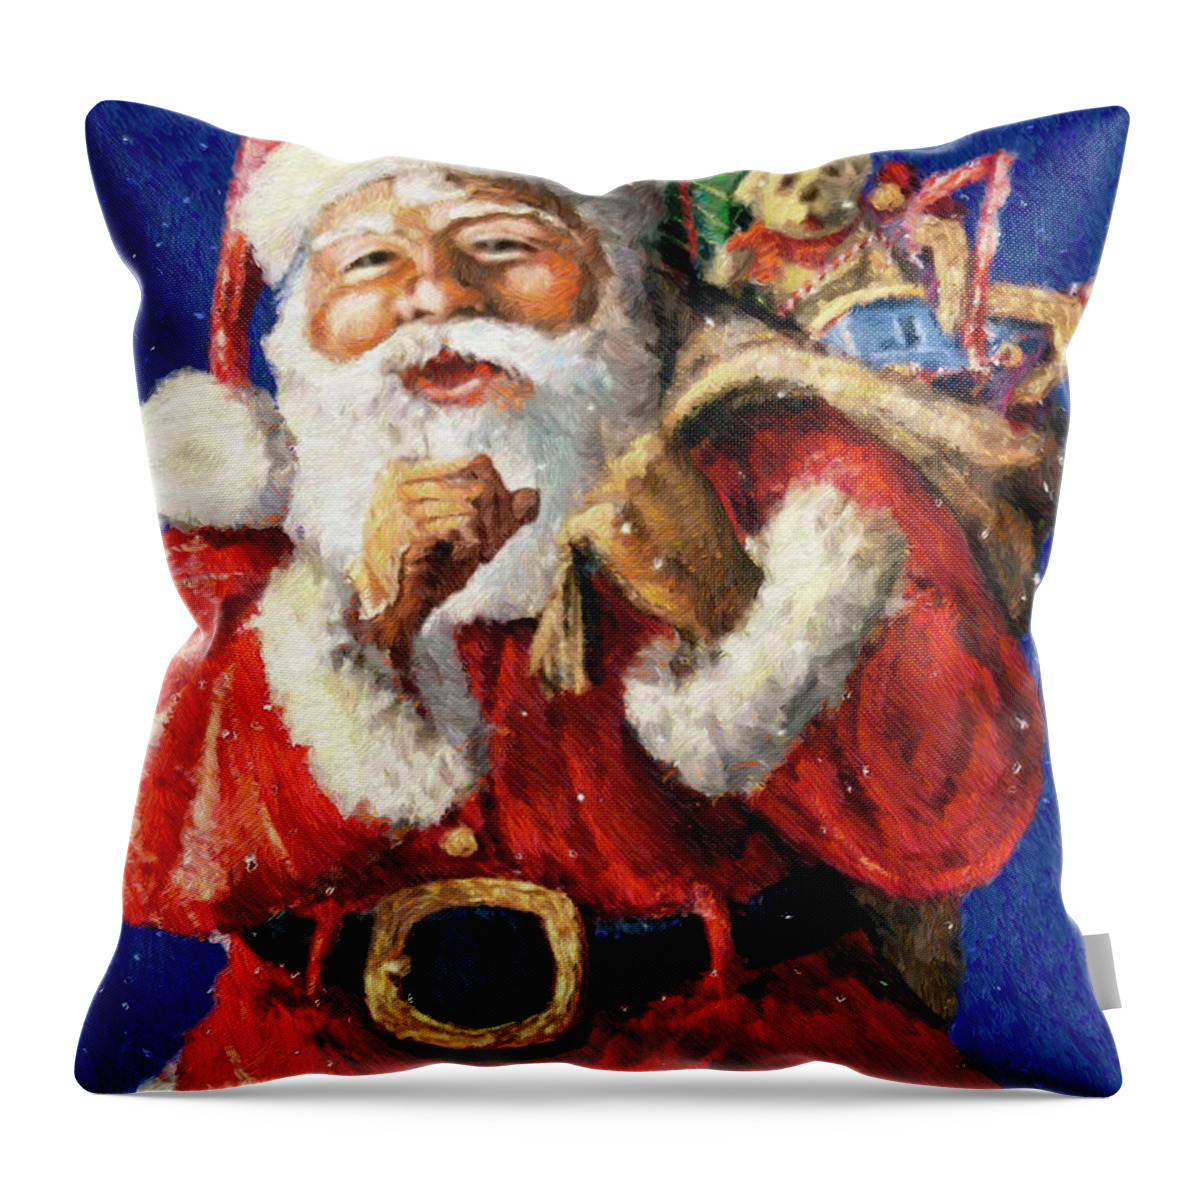 Christmas Throw Pillow featuring the painting Santa is Magic by Rafael Salazar